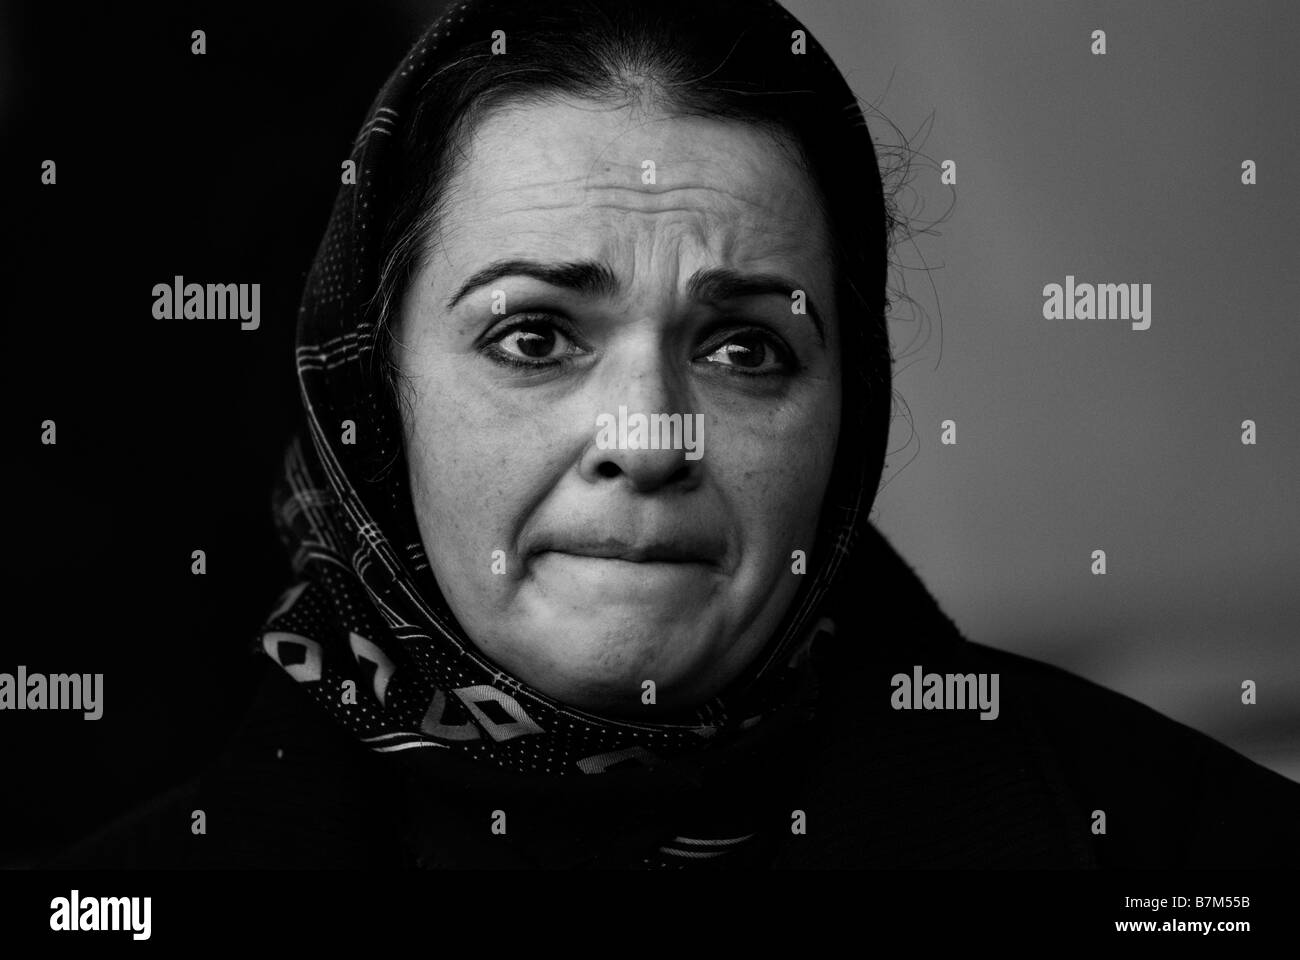 A Palestinian woman resident of Gaza Strip looks worried soon after entering Israel at the Erez border crossing with Israel on January 02 2009 Stock Photo